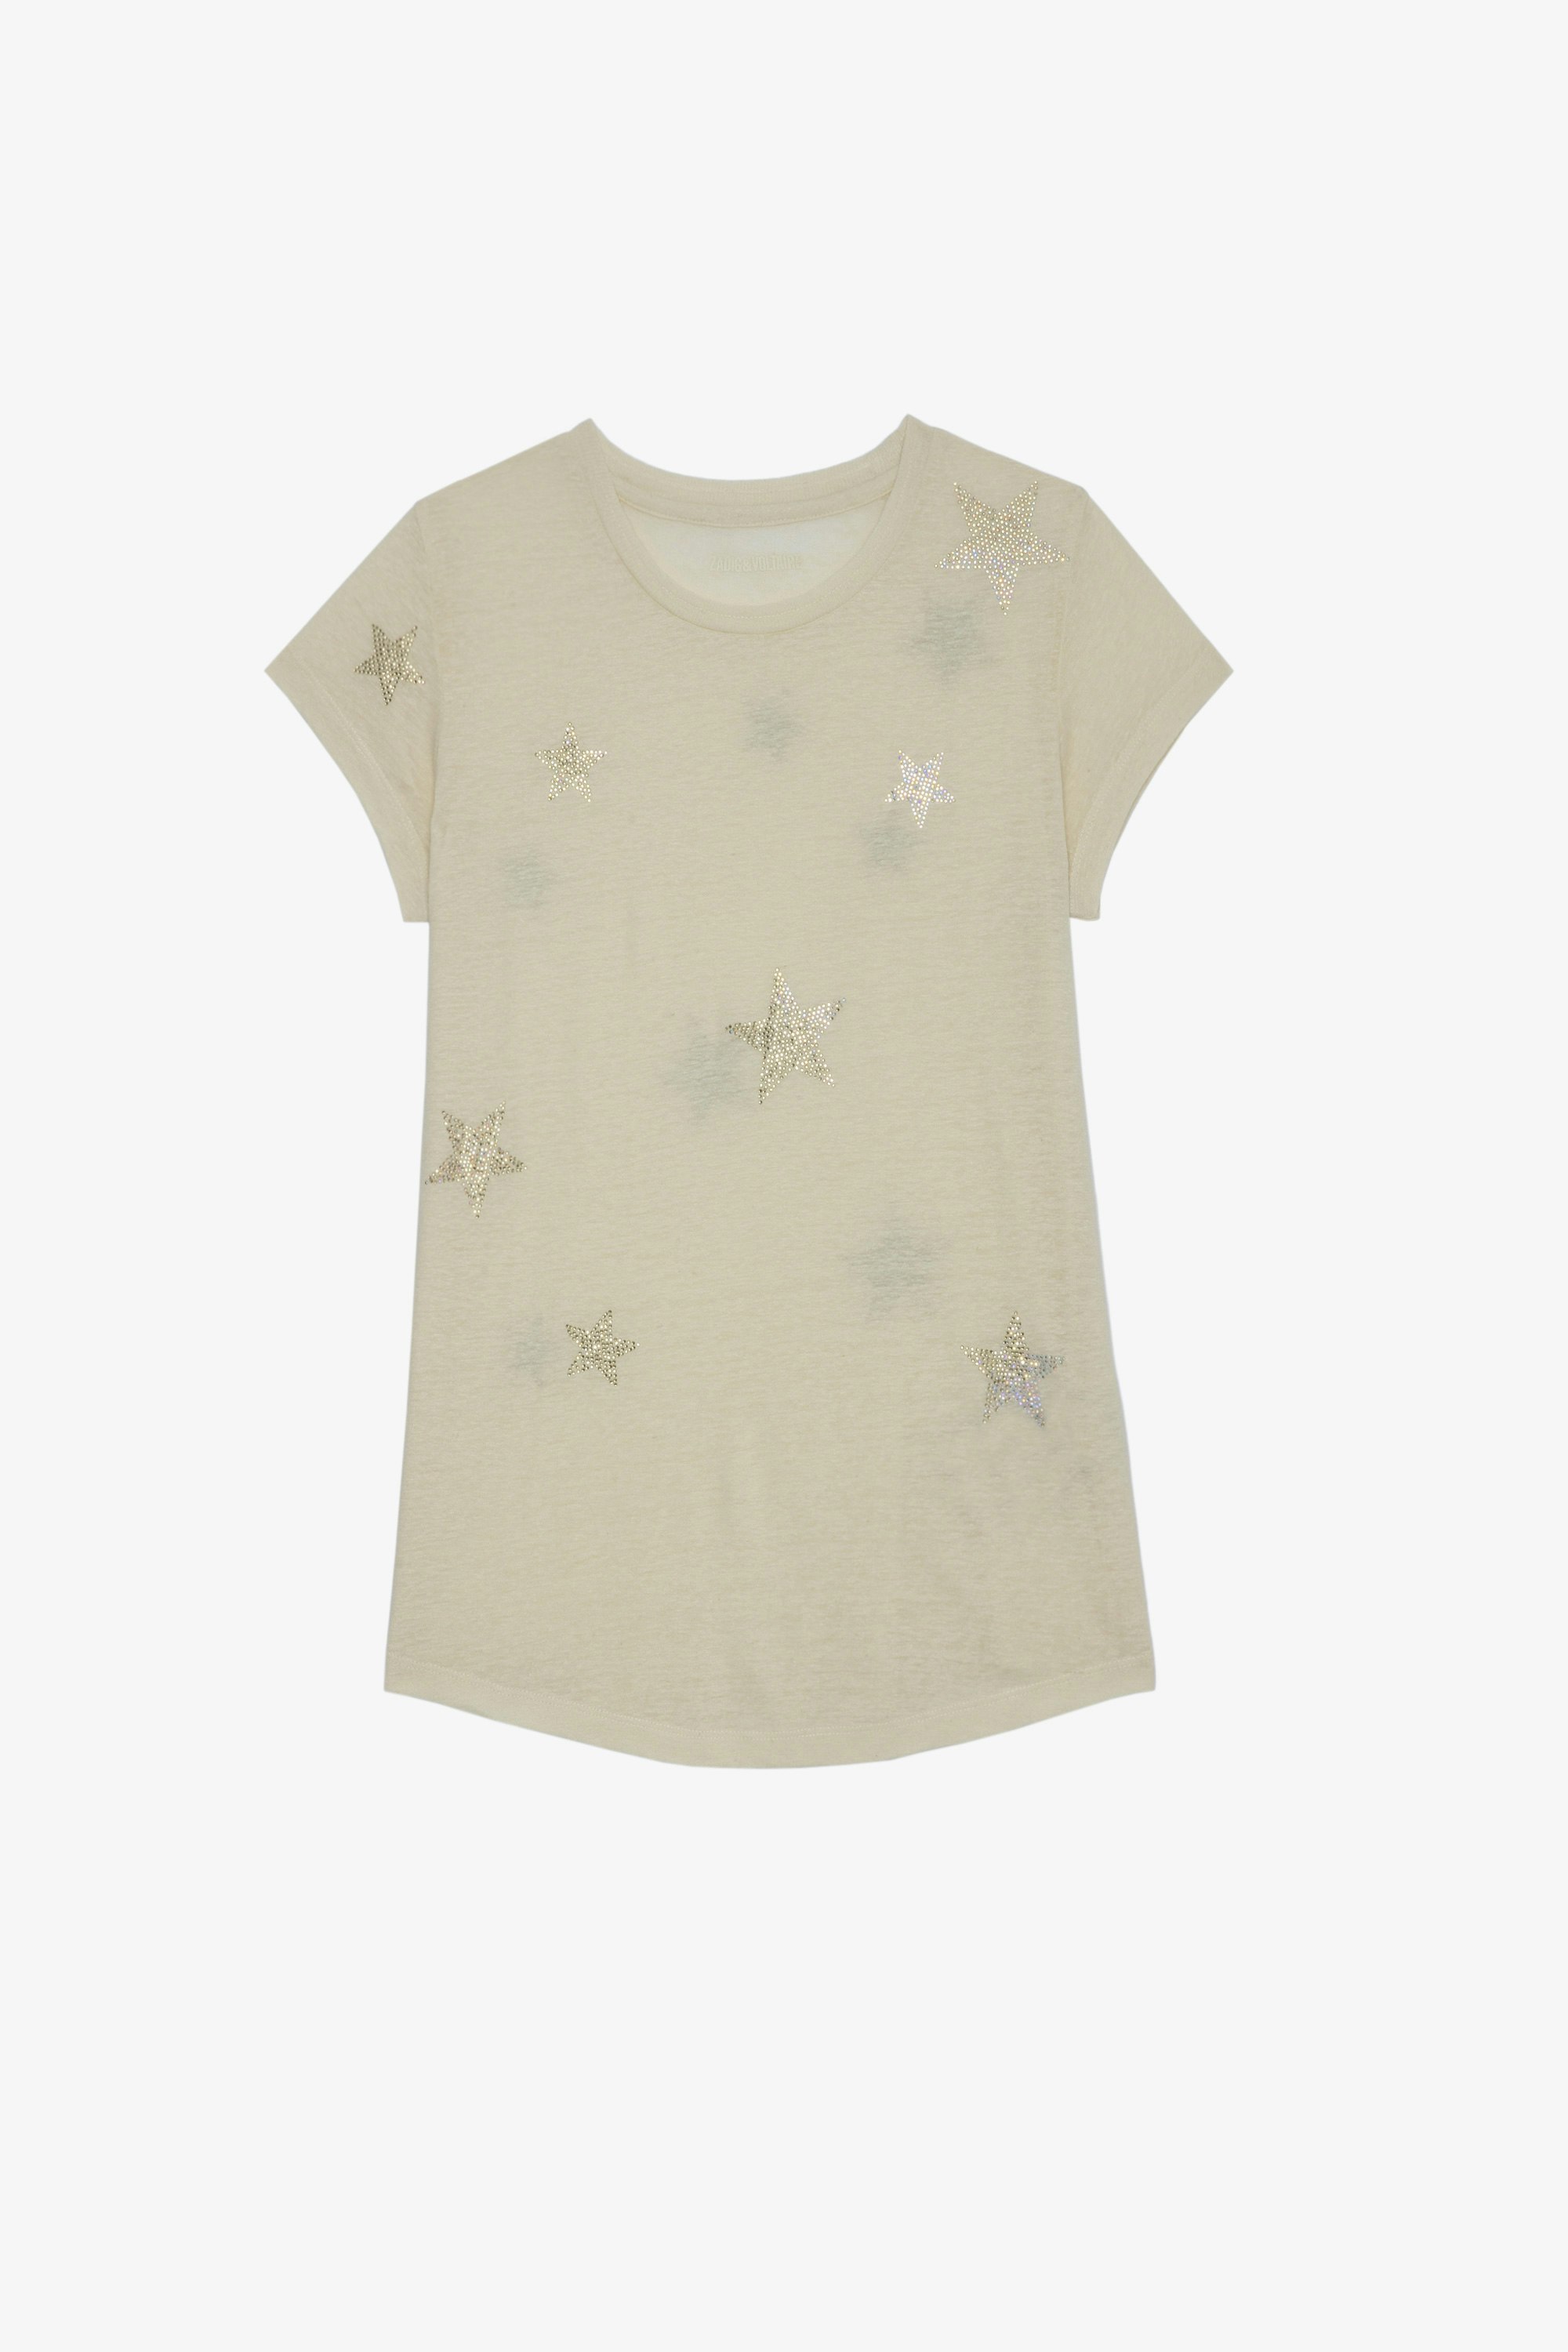 Skinny Stars Diamanté Ｔシャツ Women’s beige cotton T-shirt with short sleeves and ZV wings motif on the back